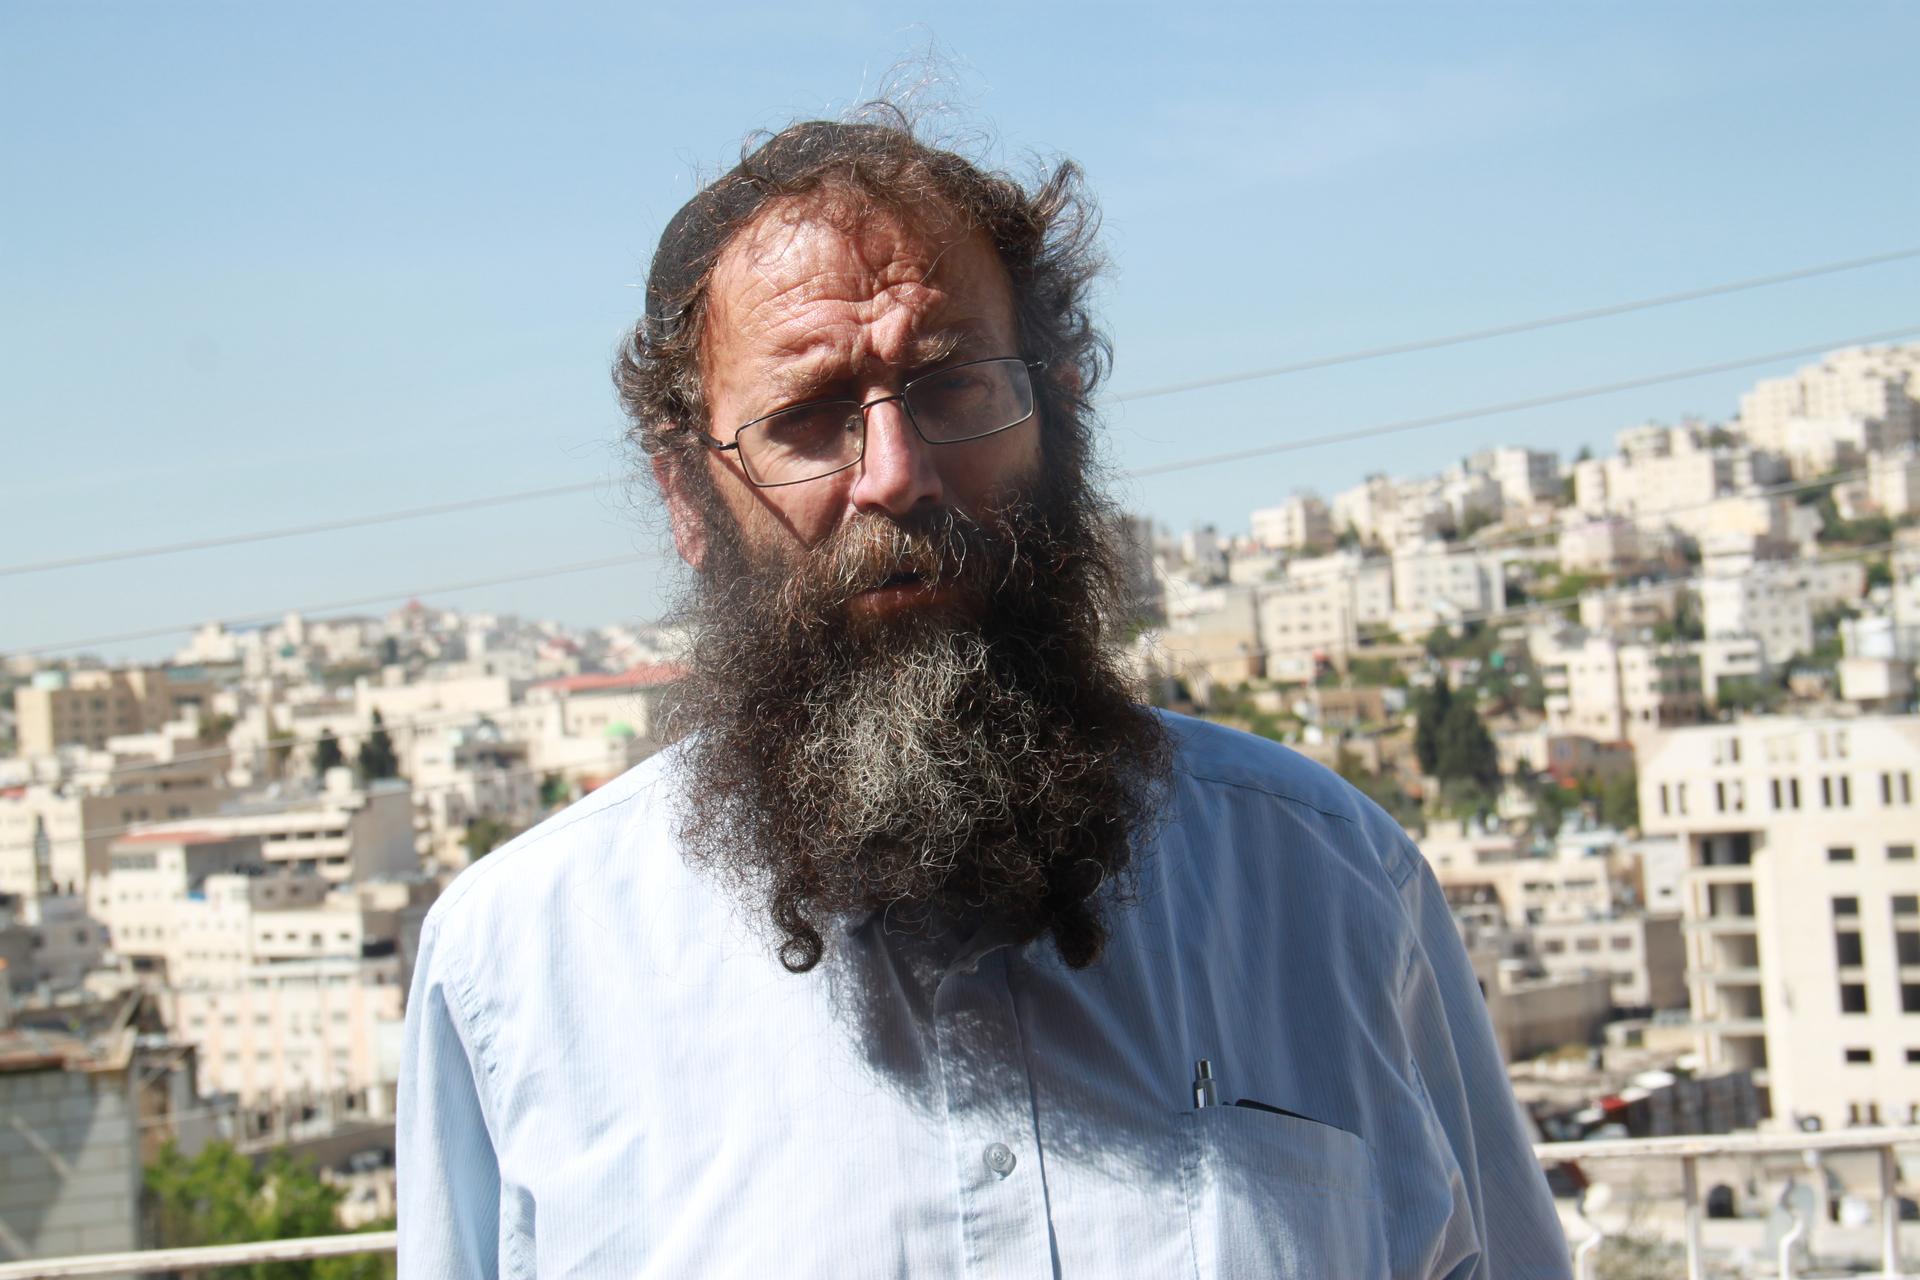 Baruch Marzel, an ultra-nationalist Israeli, shook the hand of the Israeli soldier who shot a suspected Palestinian attacker lying on the ground in Hebron. 